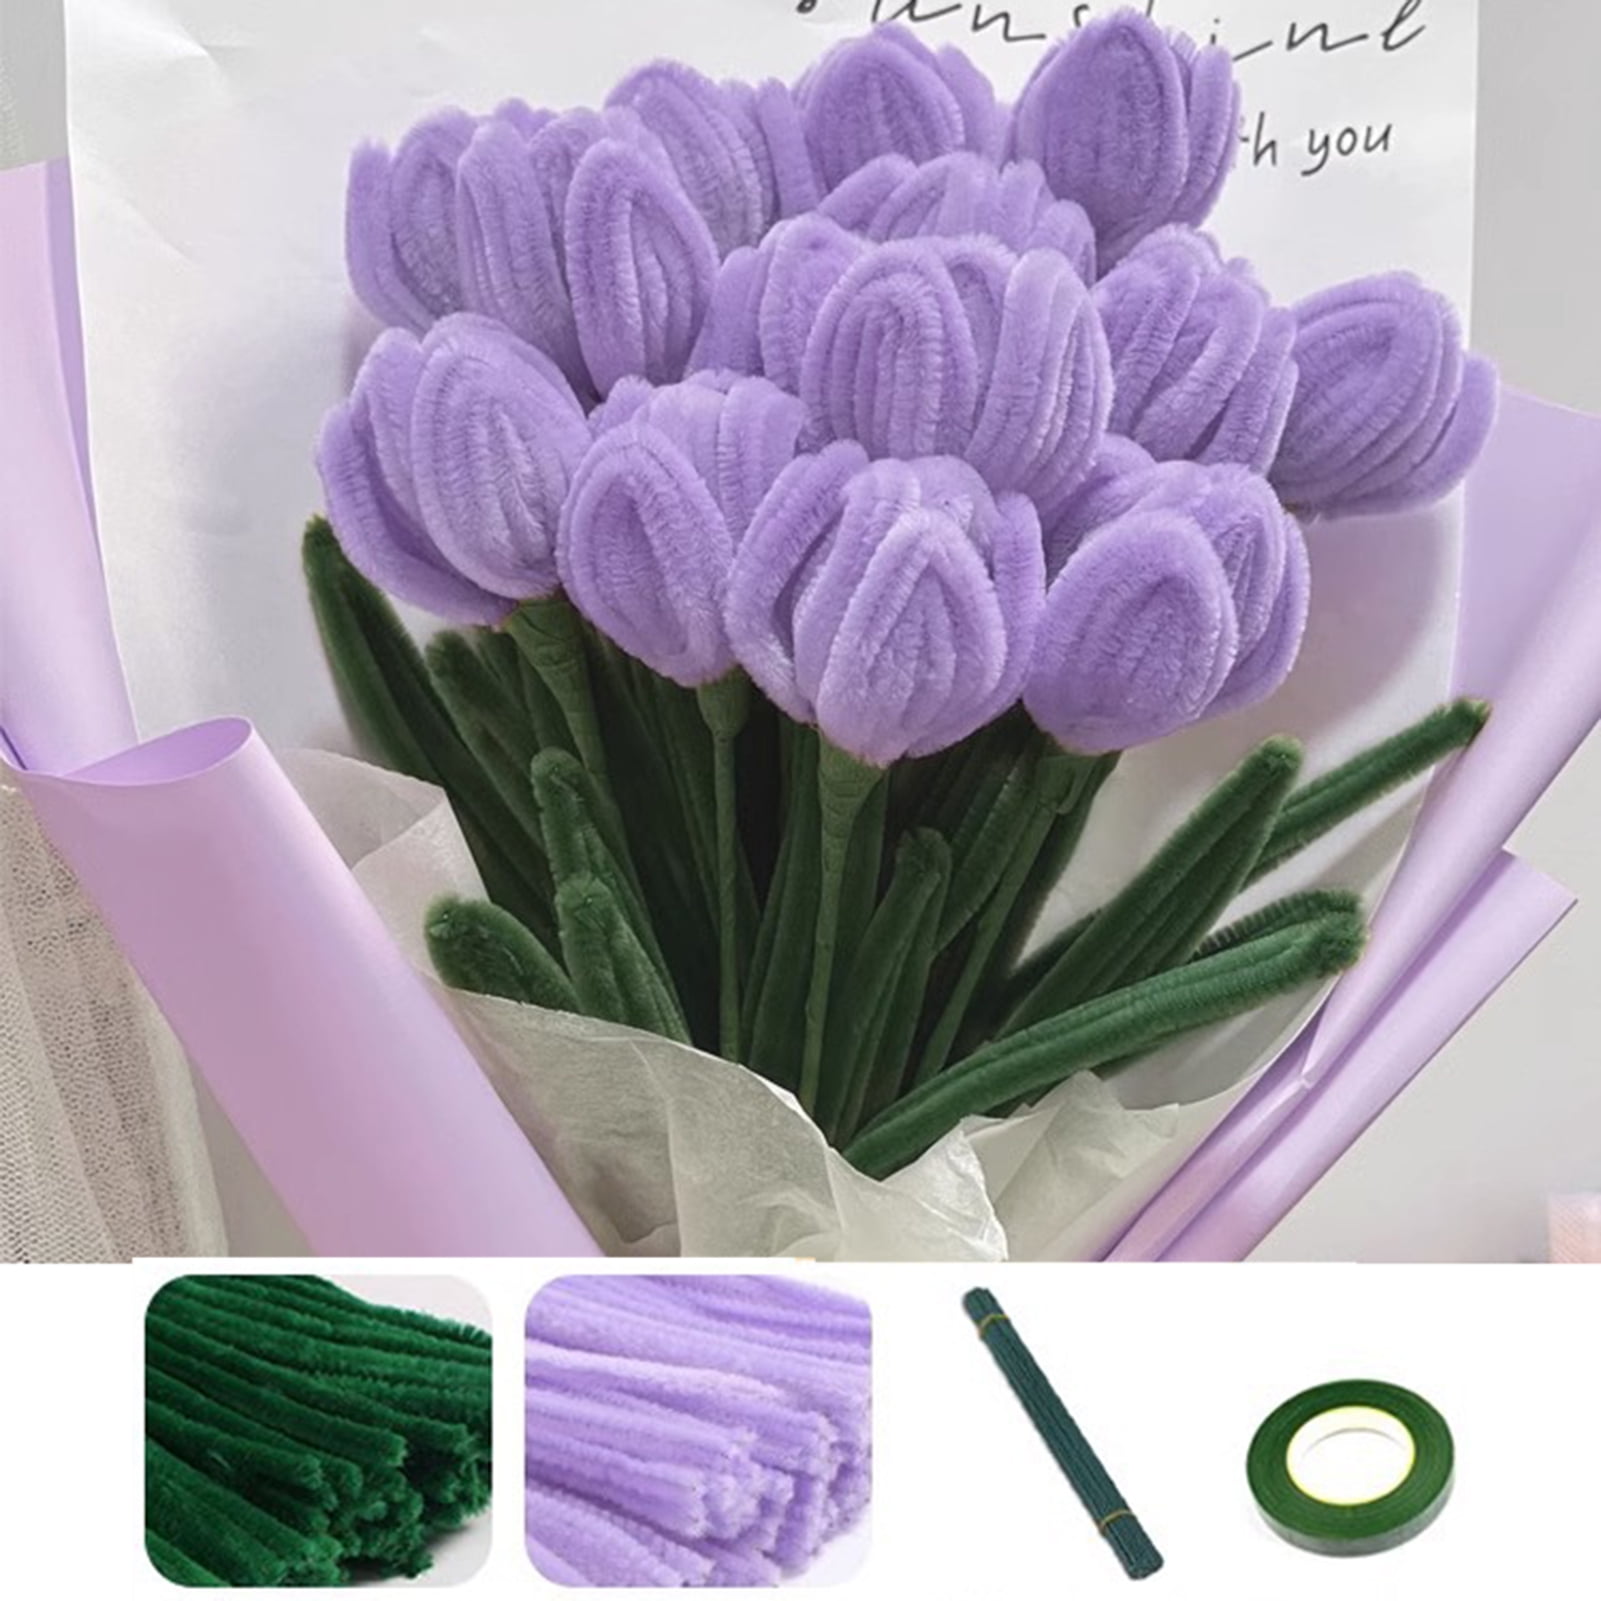 iCraftine 200 Pieces Pipe Cleaners Craft Supplies DIY Chenille Stems Tulip Bouquet Kit with Instructions for Wedding Gift, HO